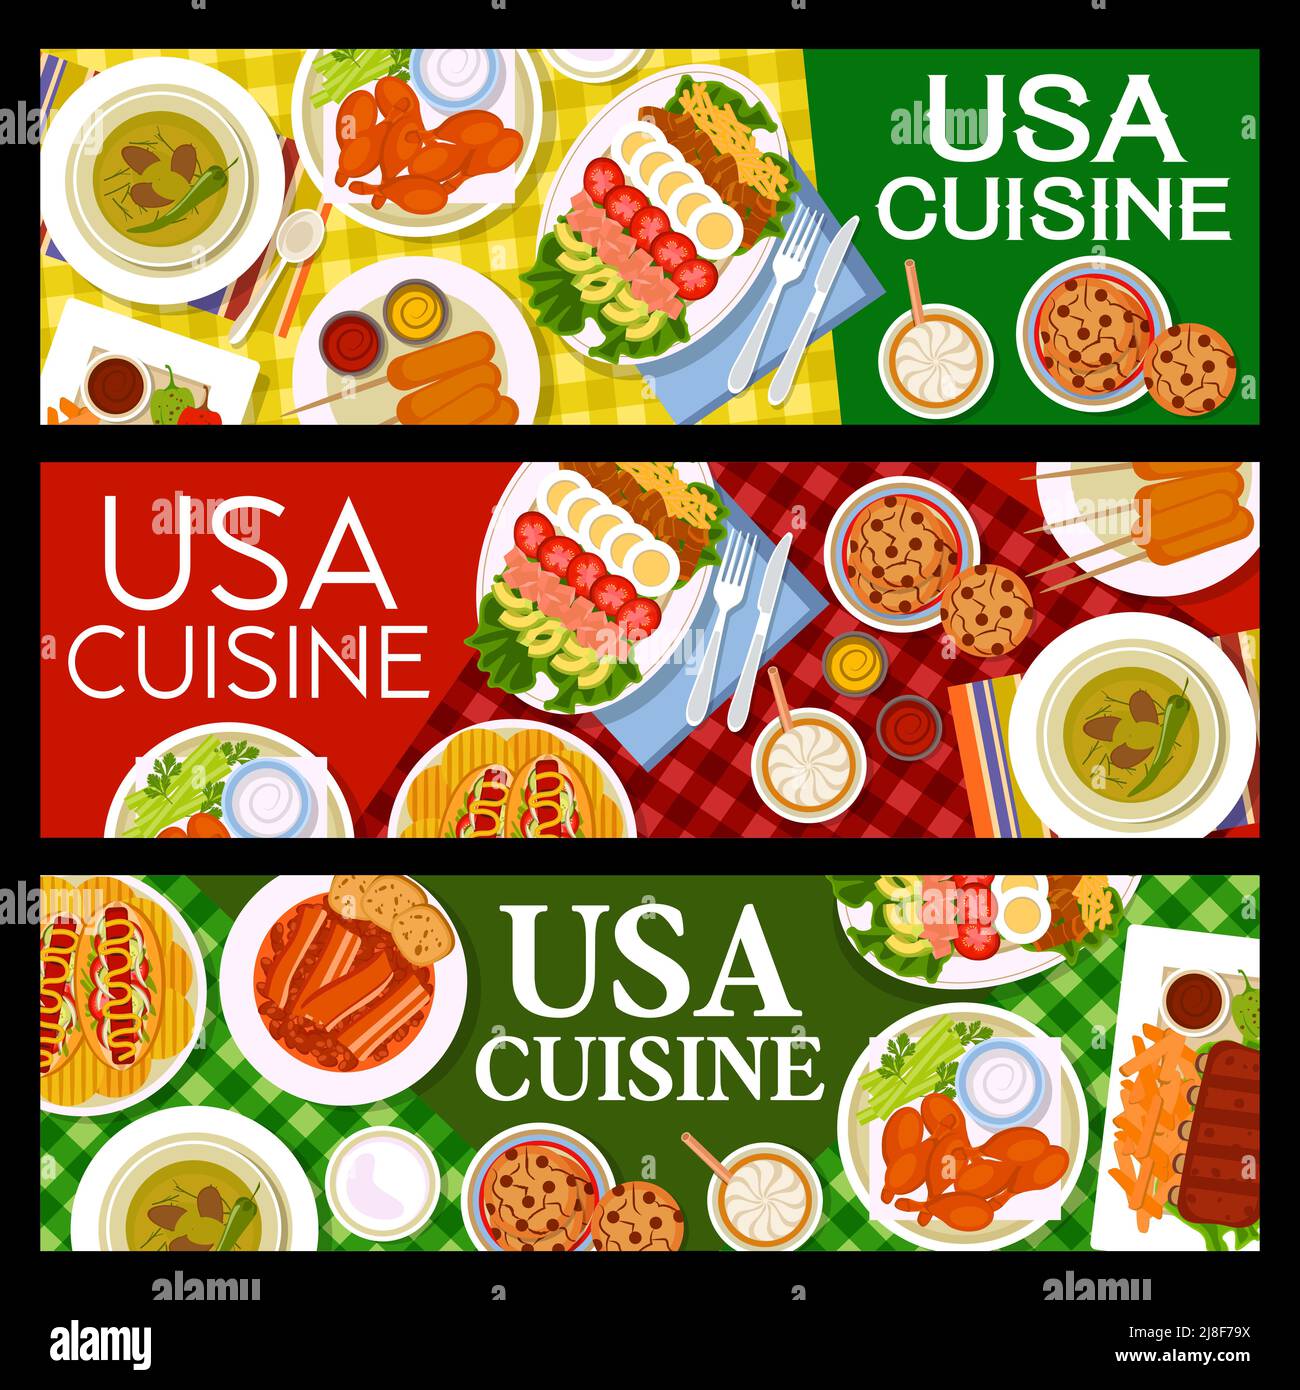 USA cuisine restaurant meals and dishes banners. Grilled ribs, cobb salad and marinated olives with chilli, beans with bacon, corn dogs and cookies with chocolate drops, BBQ chicken, hot dogs vector Stock Vector